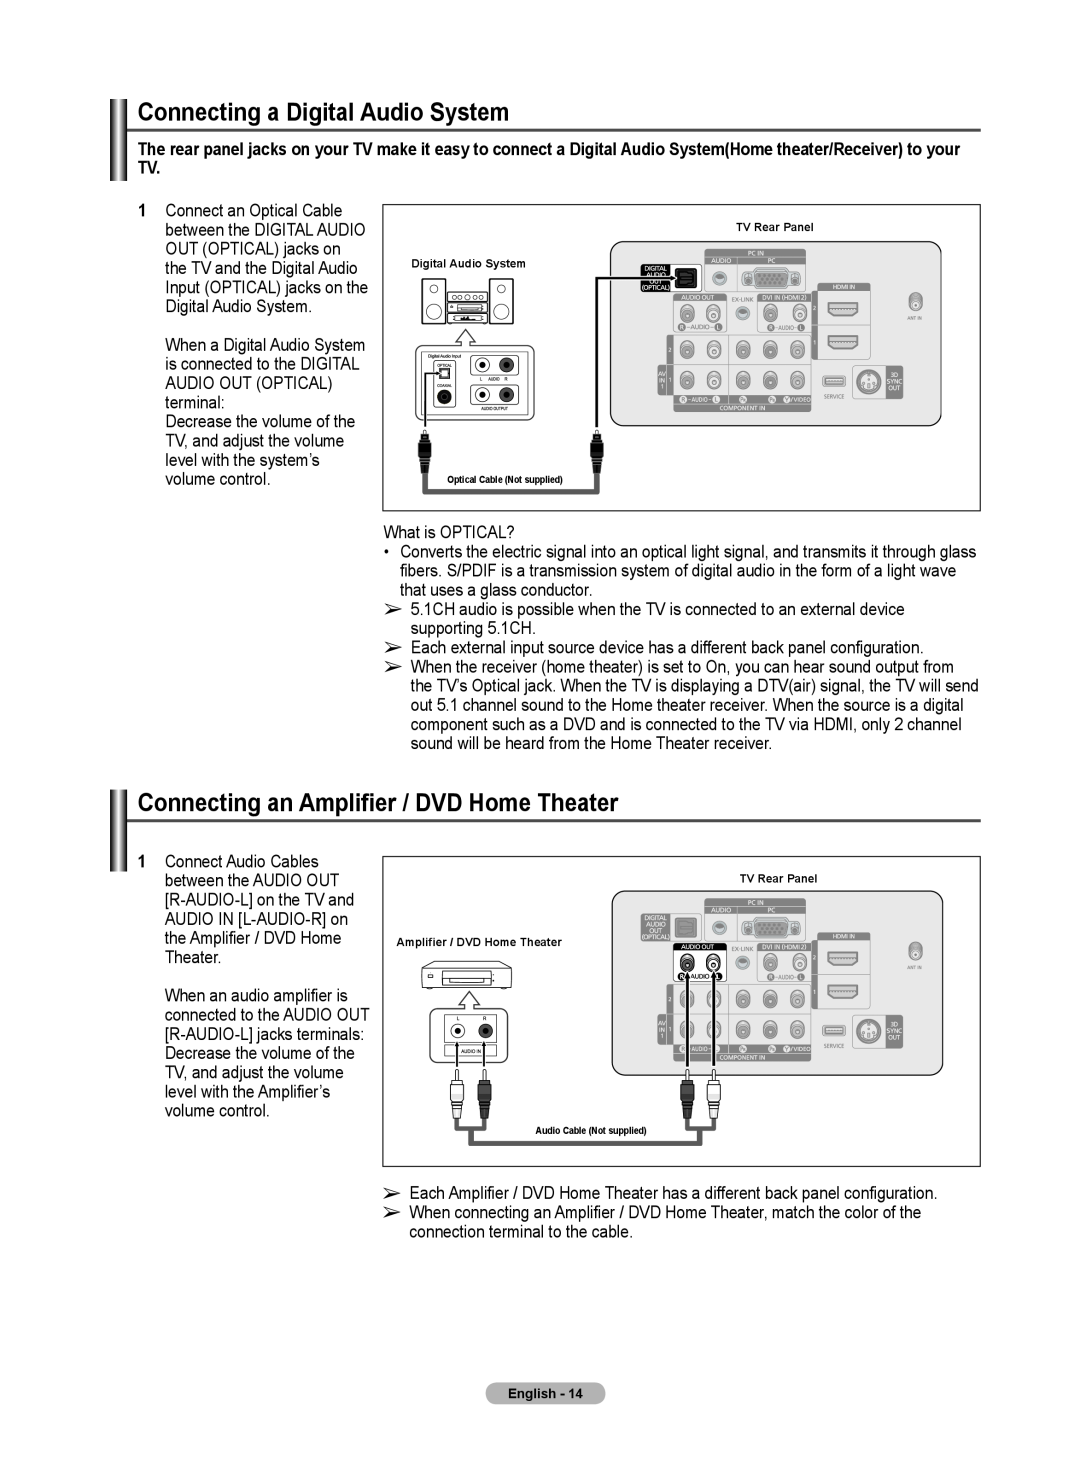 Samsung 460 user manual Connecting a Digital Audio System, Connecting an Amplifier / DVD Home Theater 